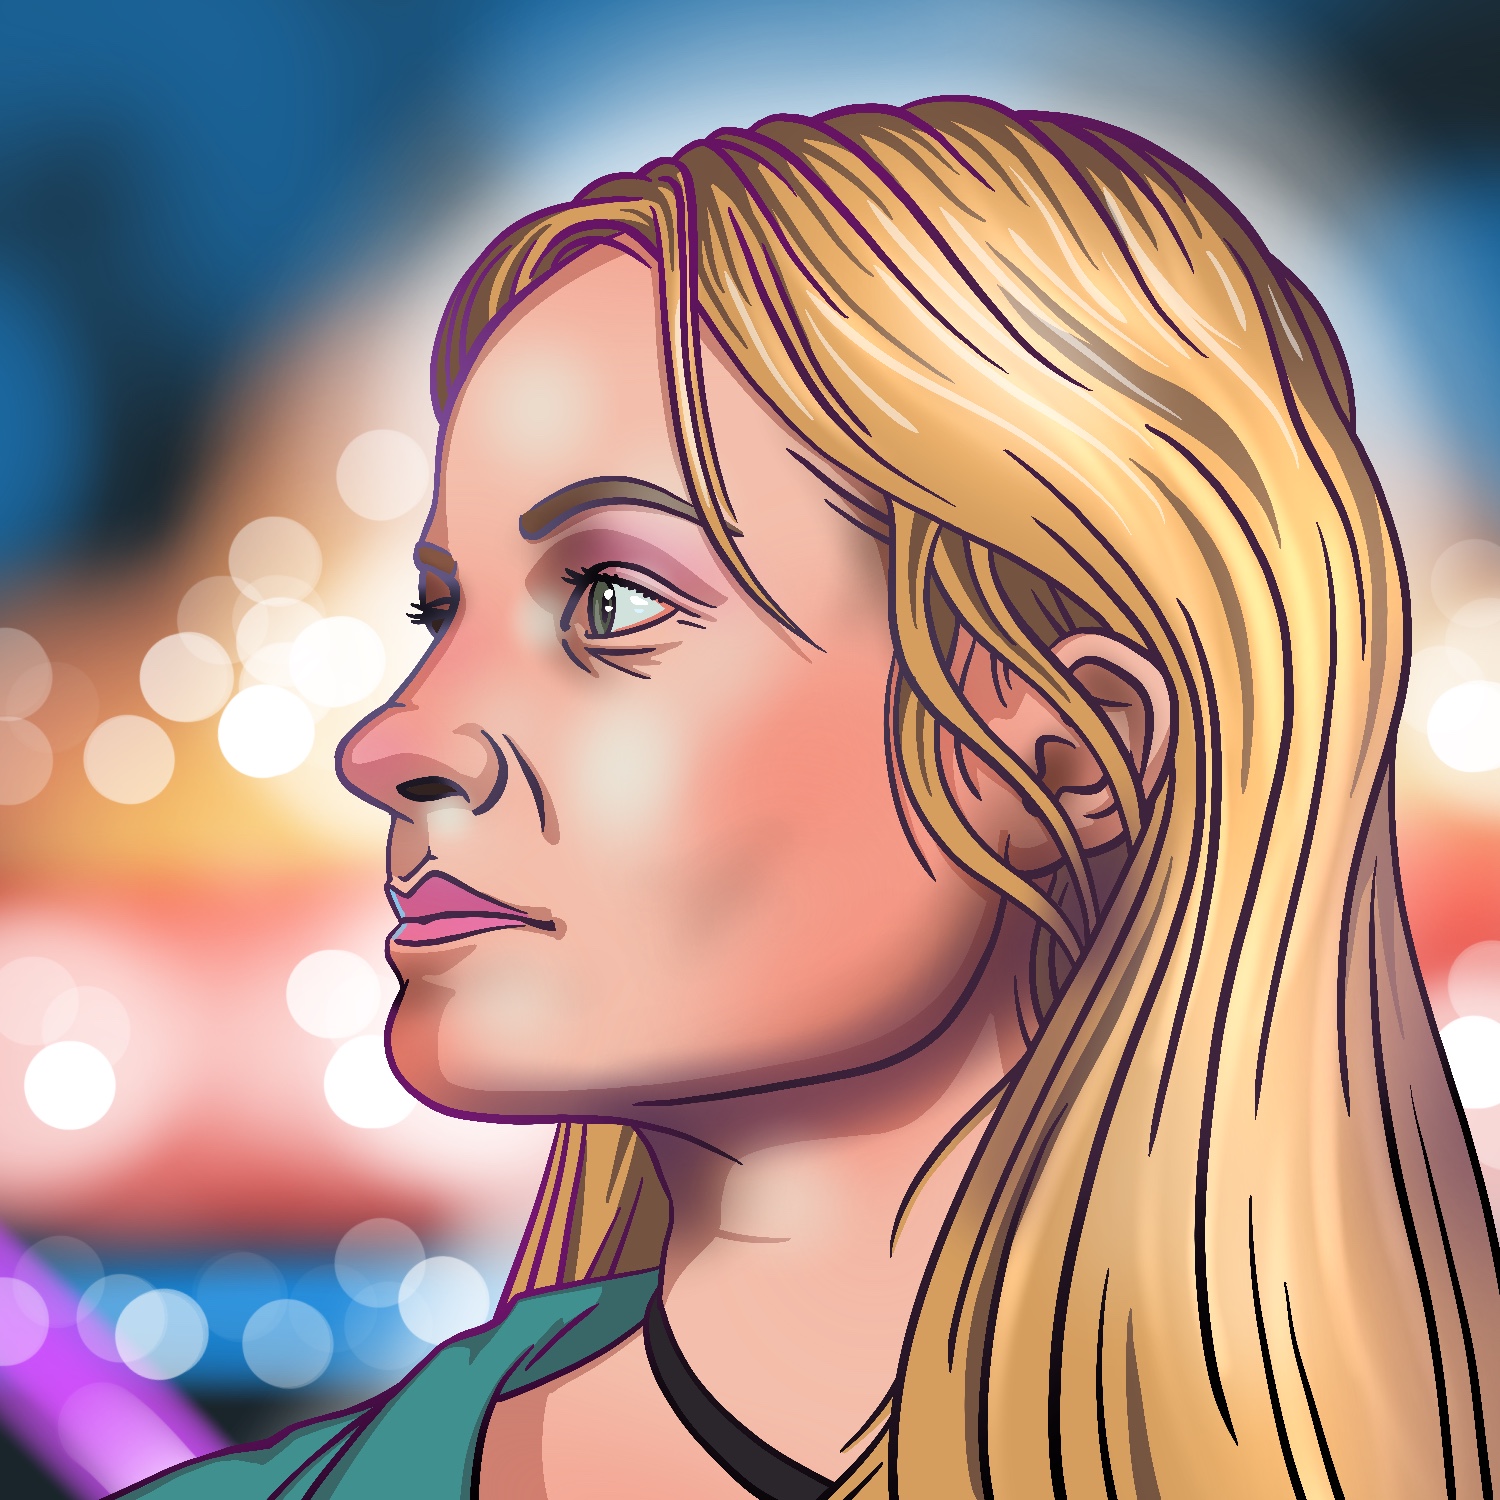 An illustration of a woman looking to the left. The woman has a light complexion, blond hair, and hazel eyes. She has a green top and black necklace, and she is lit by bright lights of a city at night. The background is a blur of color and points of light.